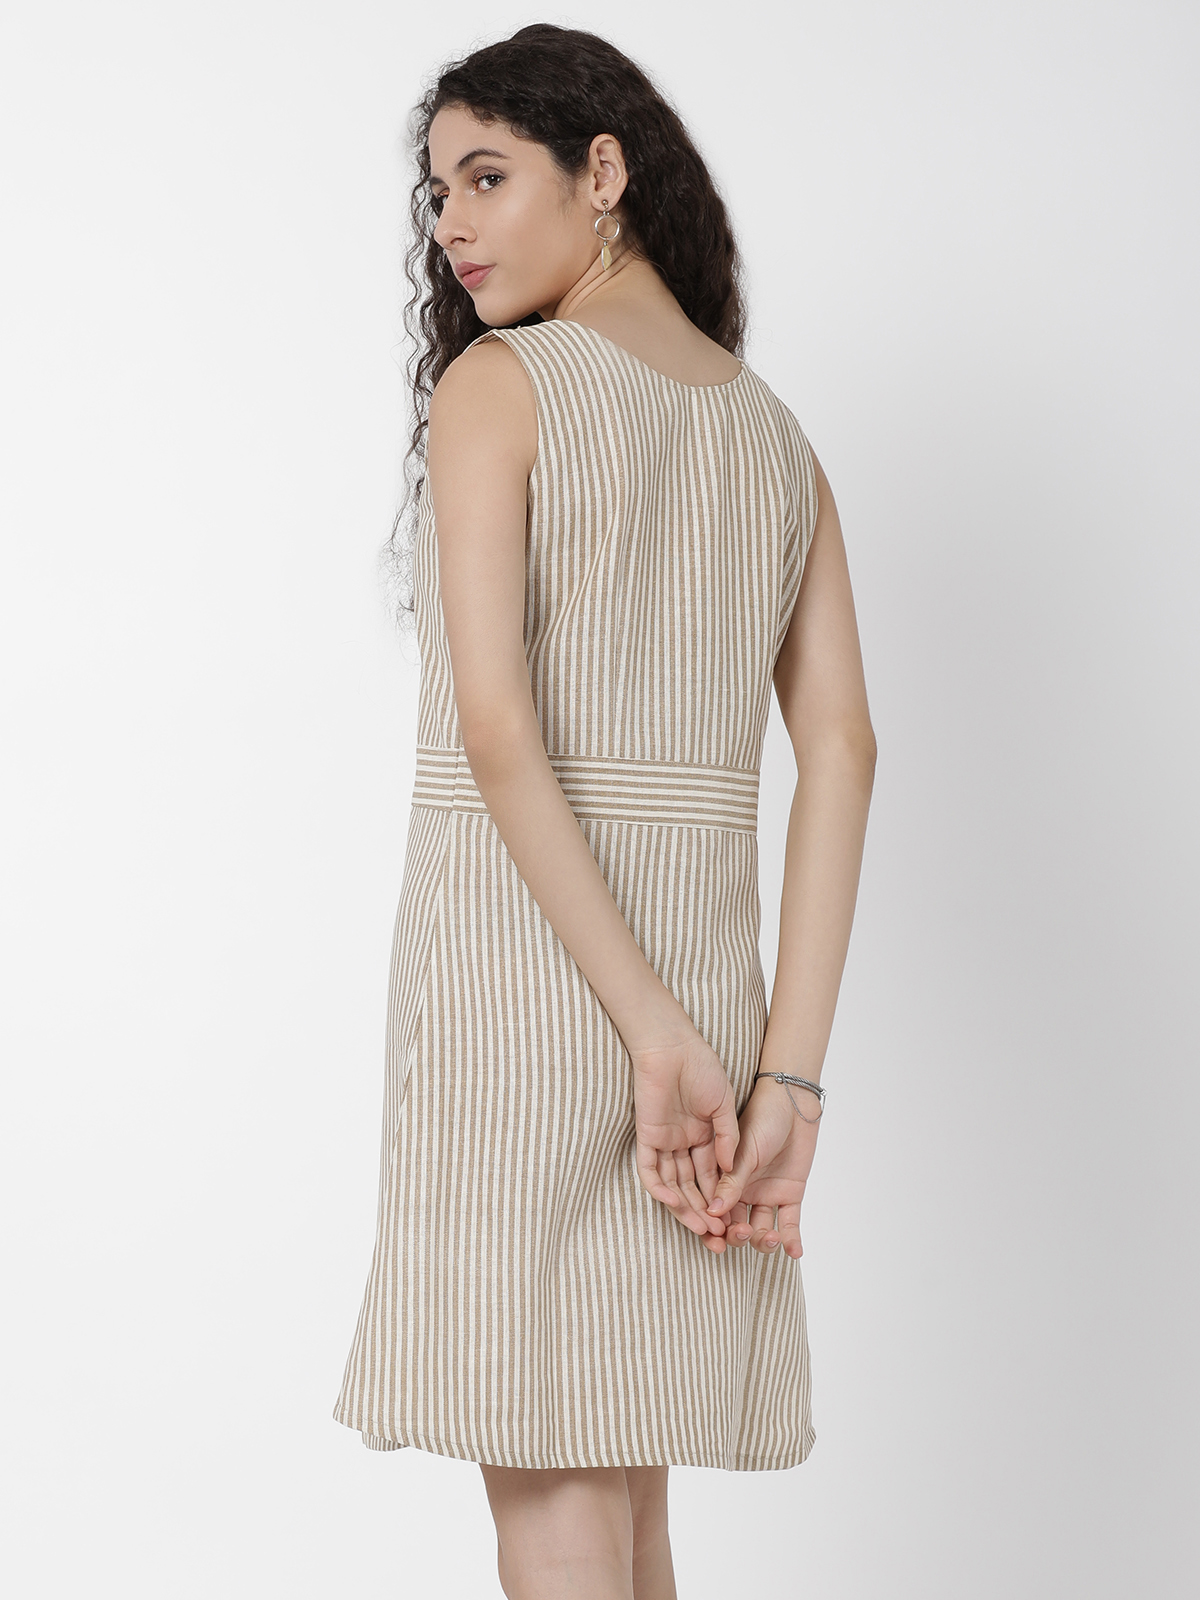 Lovely Beige With Striped One Piece A Line Dress 